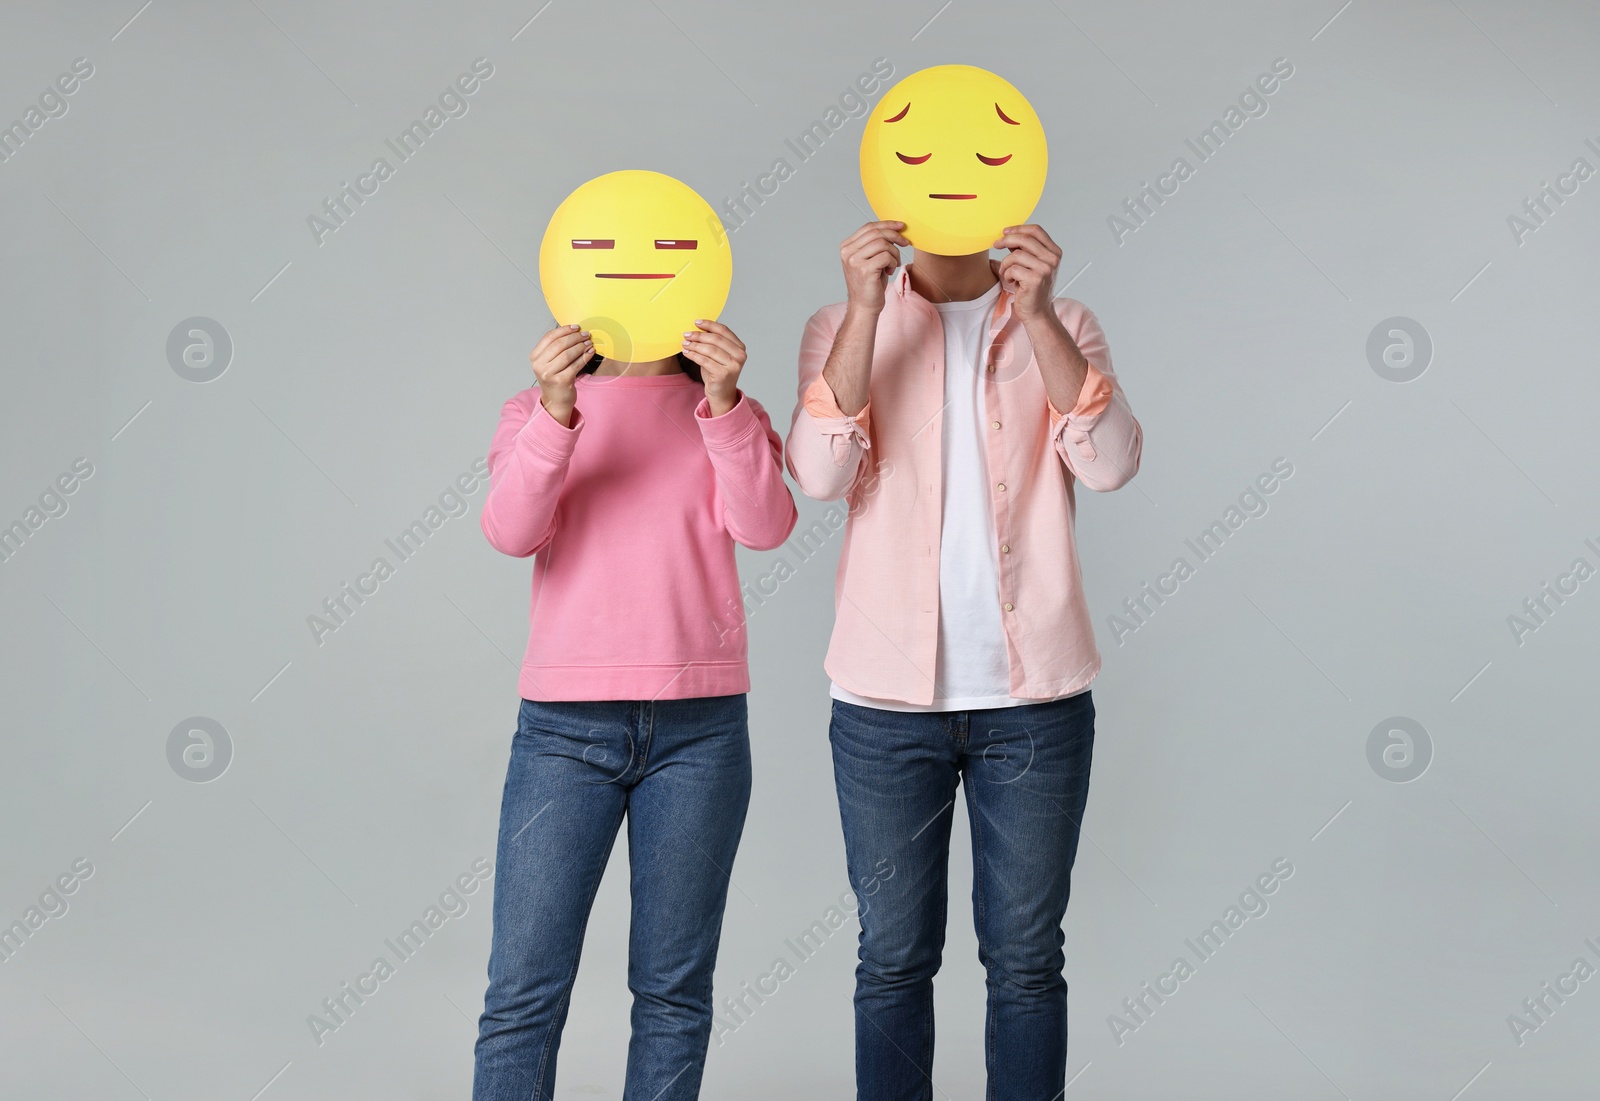 Photo of People covering faces with sad emoticons on grey background